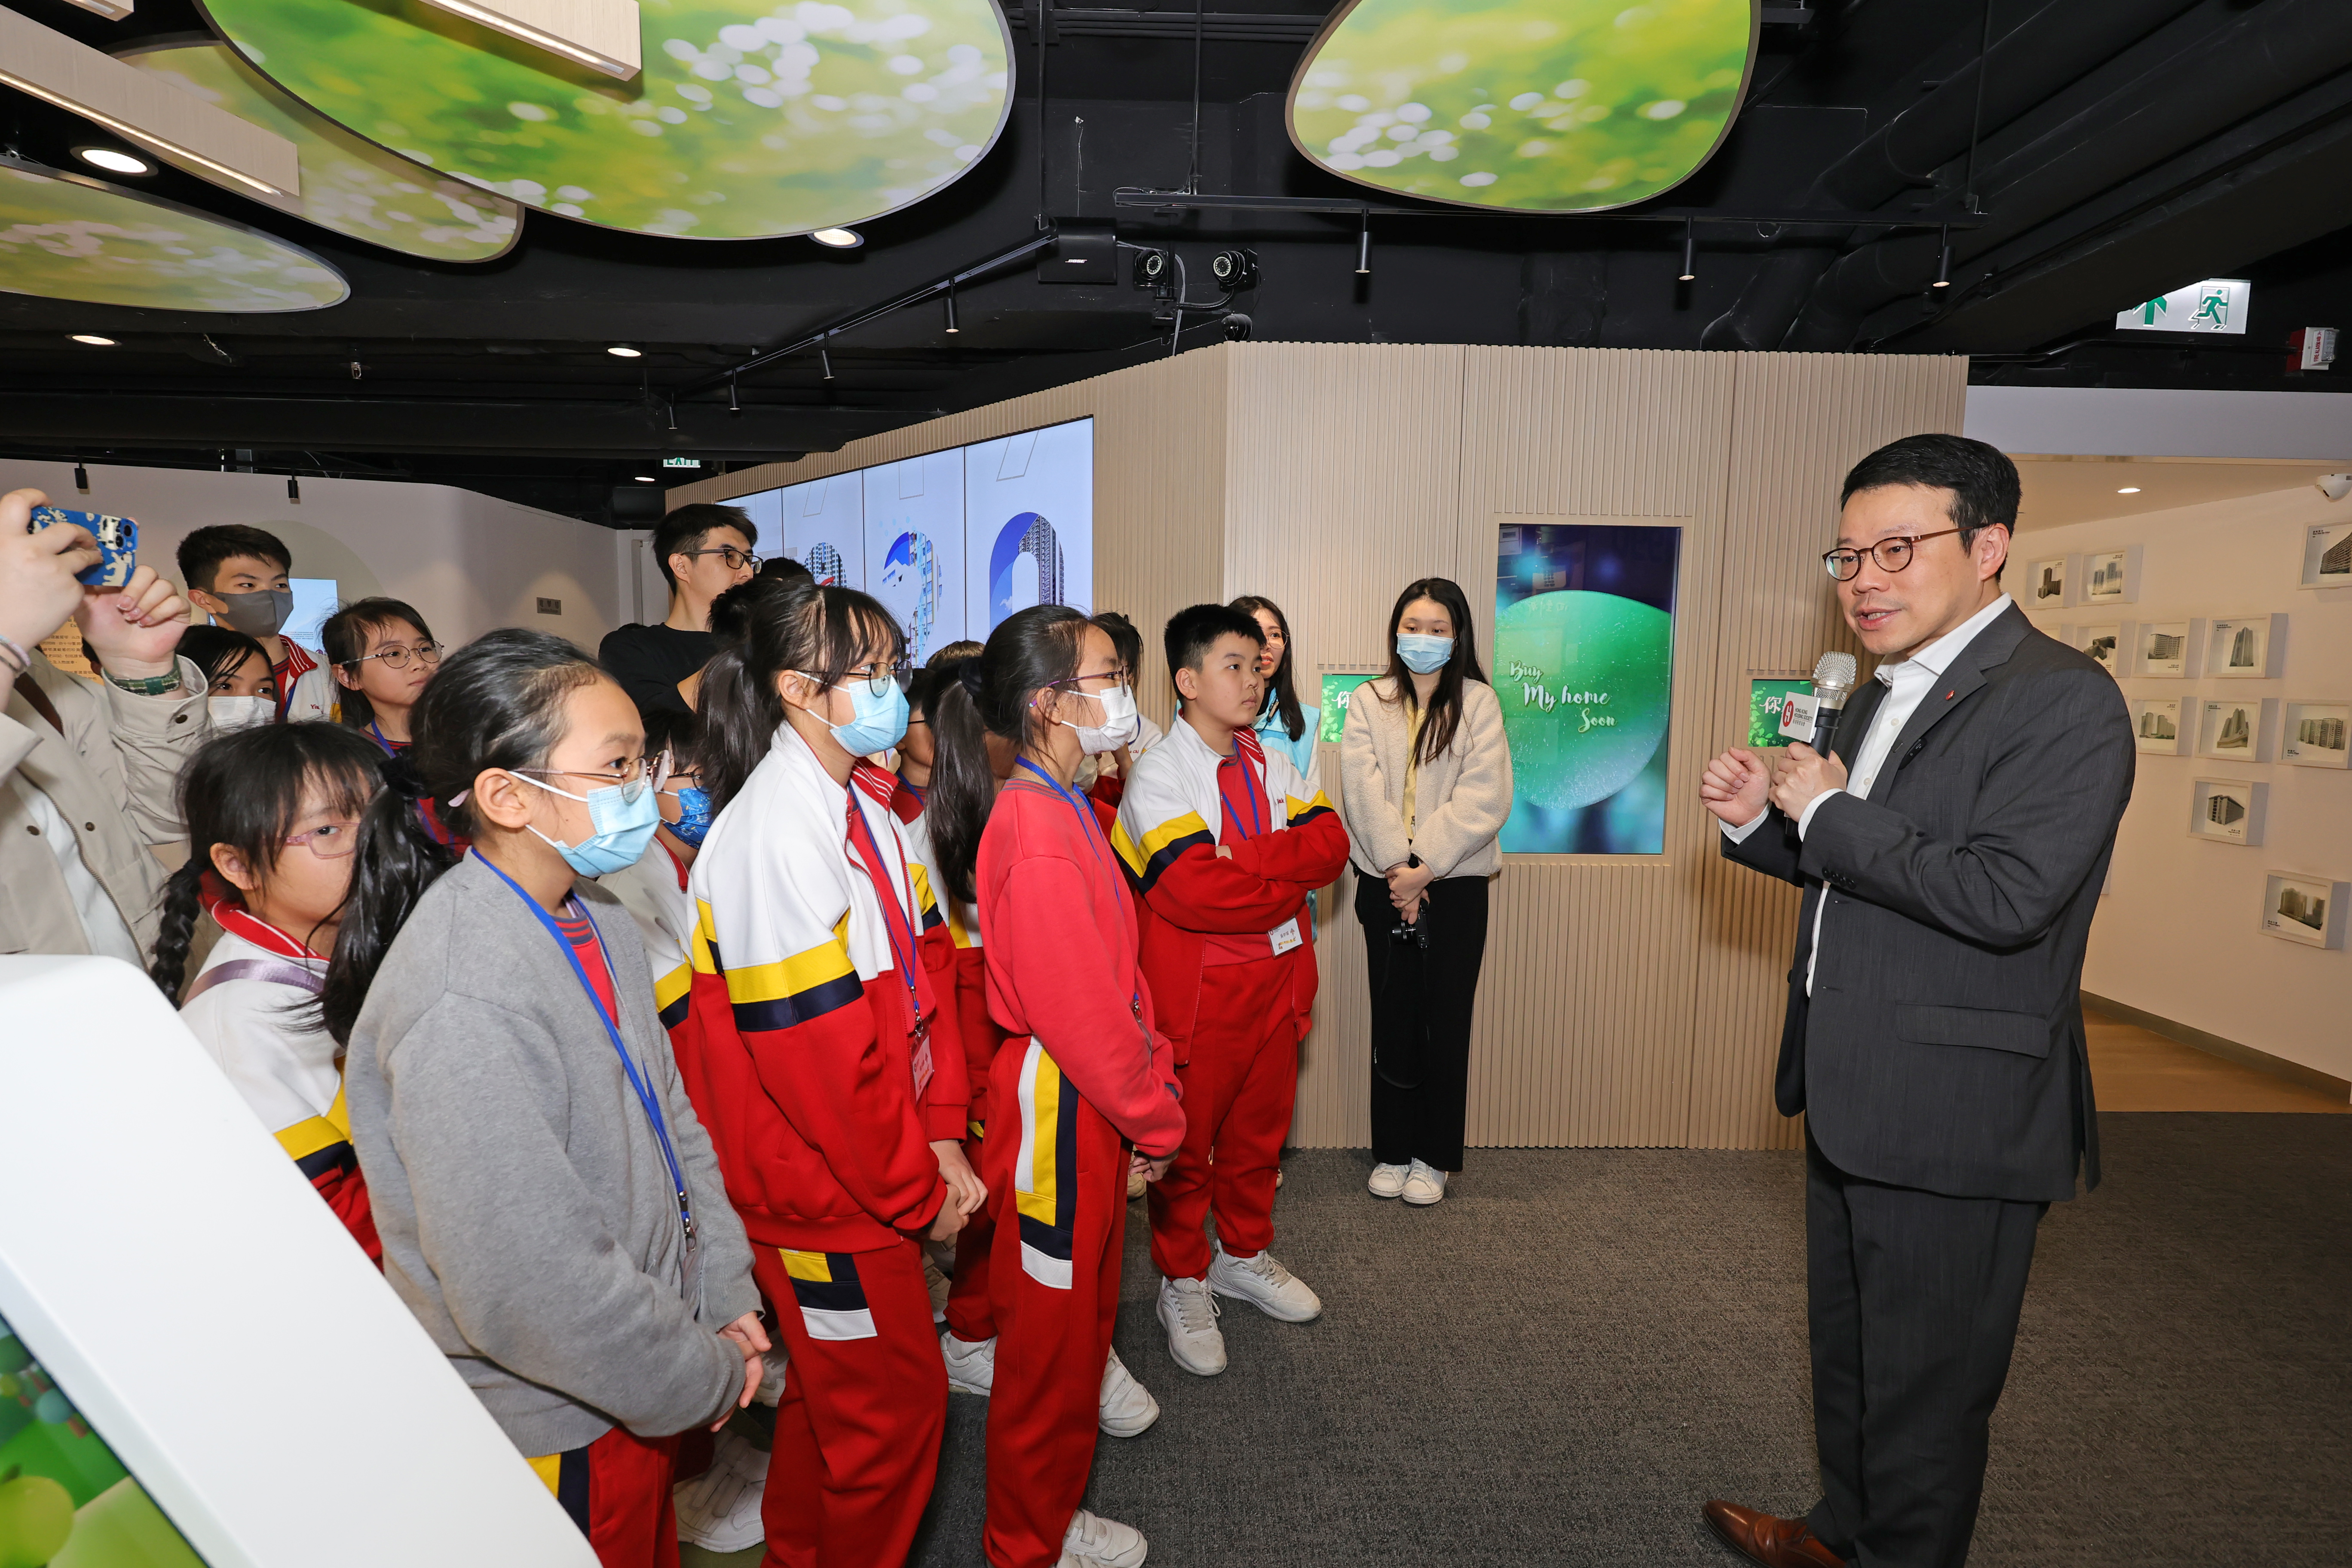 HKHS Chief Executive Officer James Chan hopes that the refreshed Exhibition Centre will continue its pivotal role in engaging the community, providing visitors a holistic understanding of HKHS through innovative experiences.